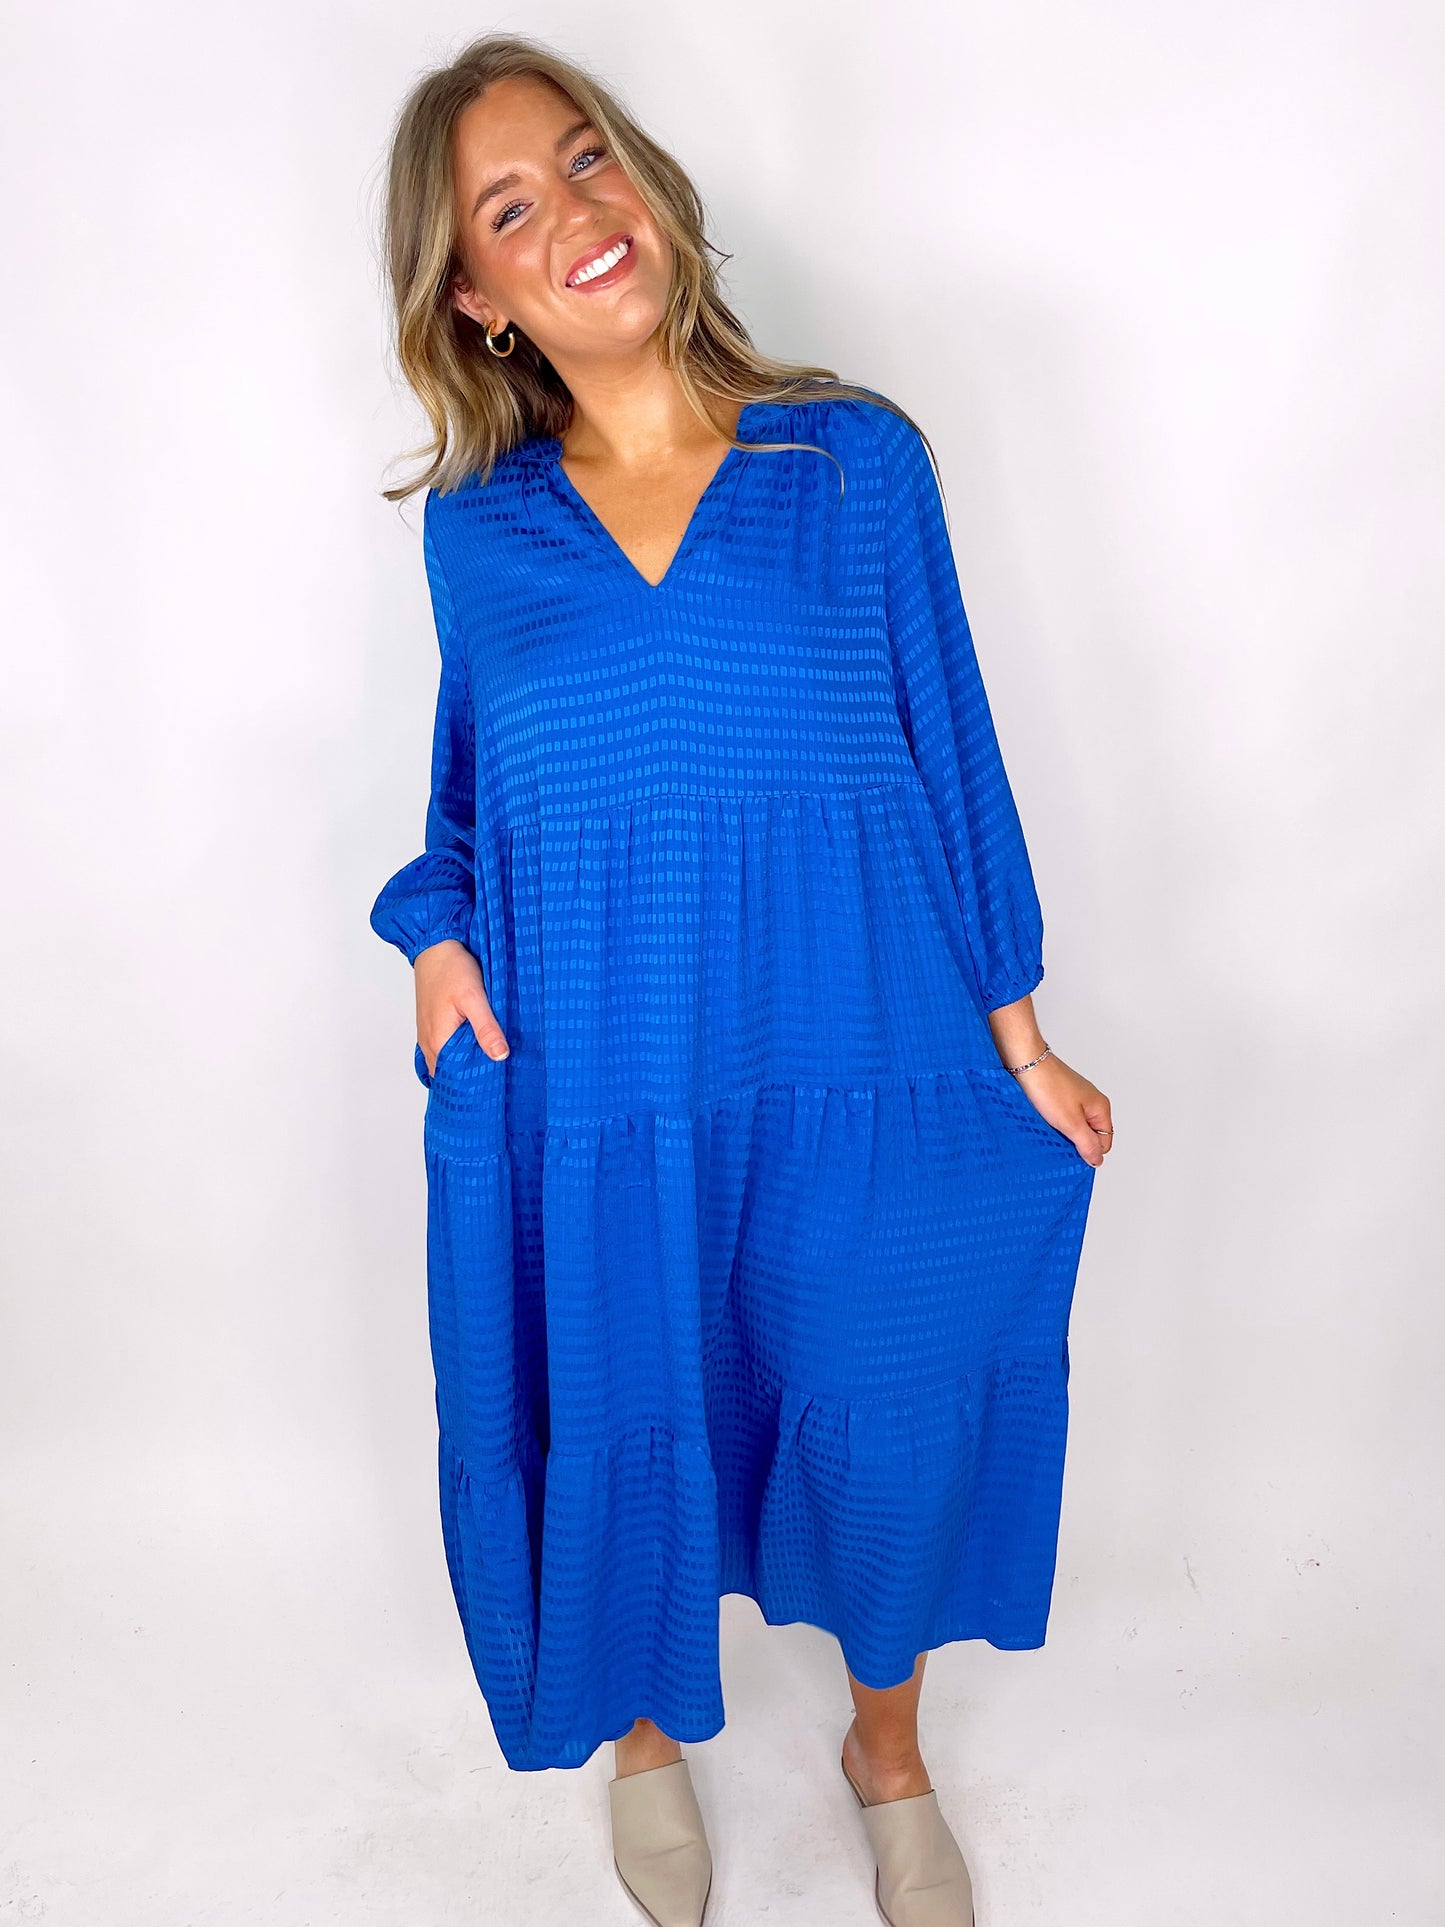 The Shannon Midi Dress-Midi Dress-Entro-The Village Shoppe, Women’s Fashion Boutique, Shop Online and In Store - Located in Muscle Shoals, AL.